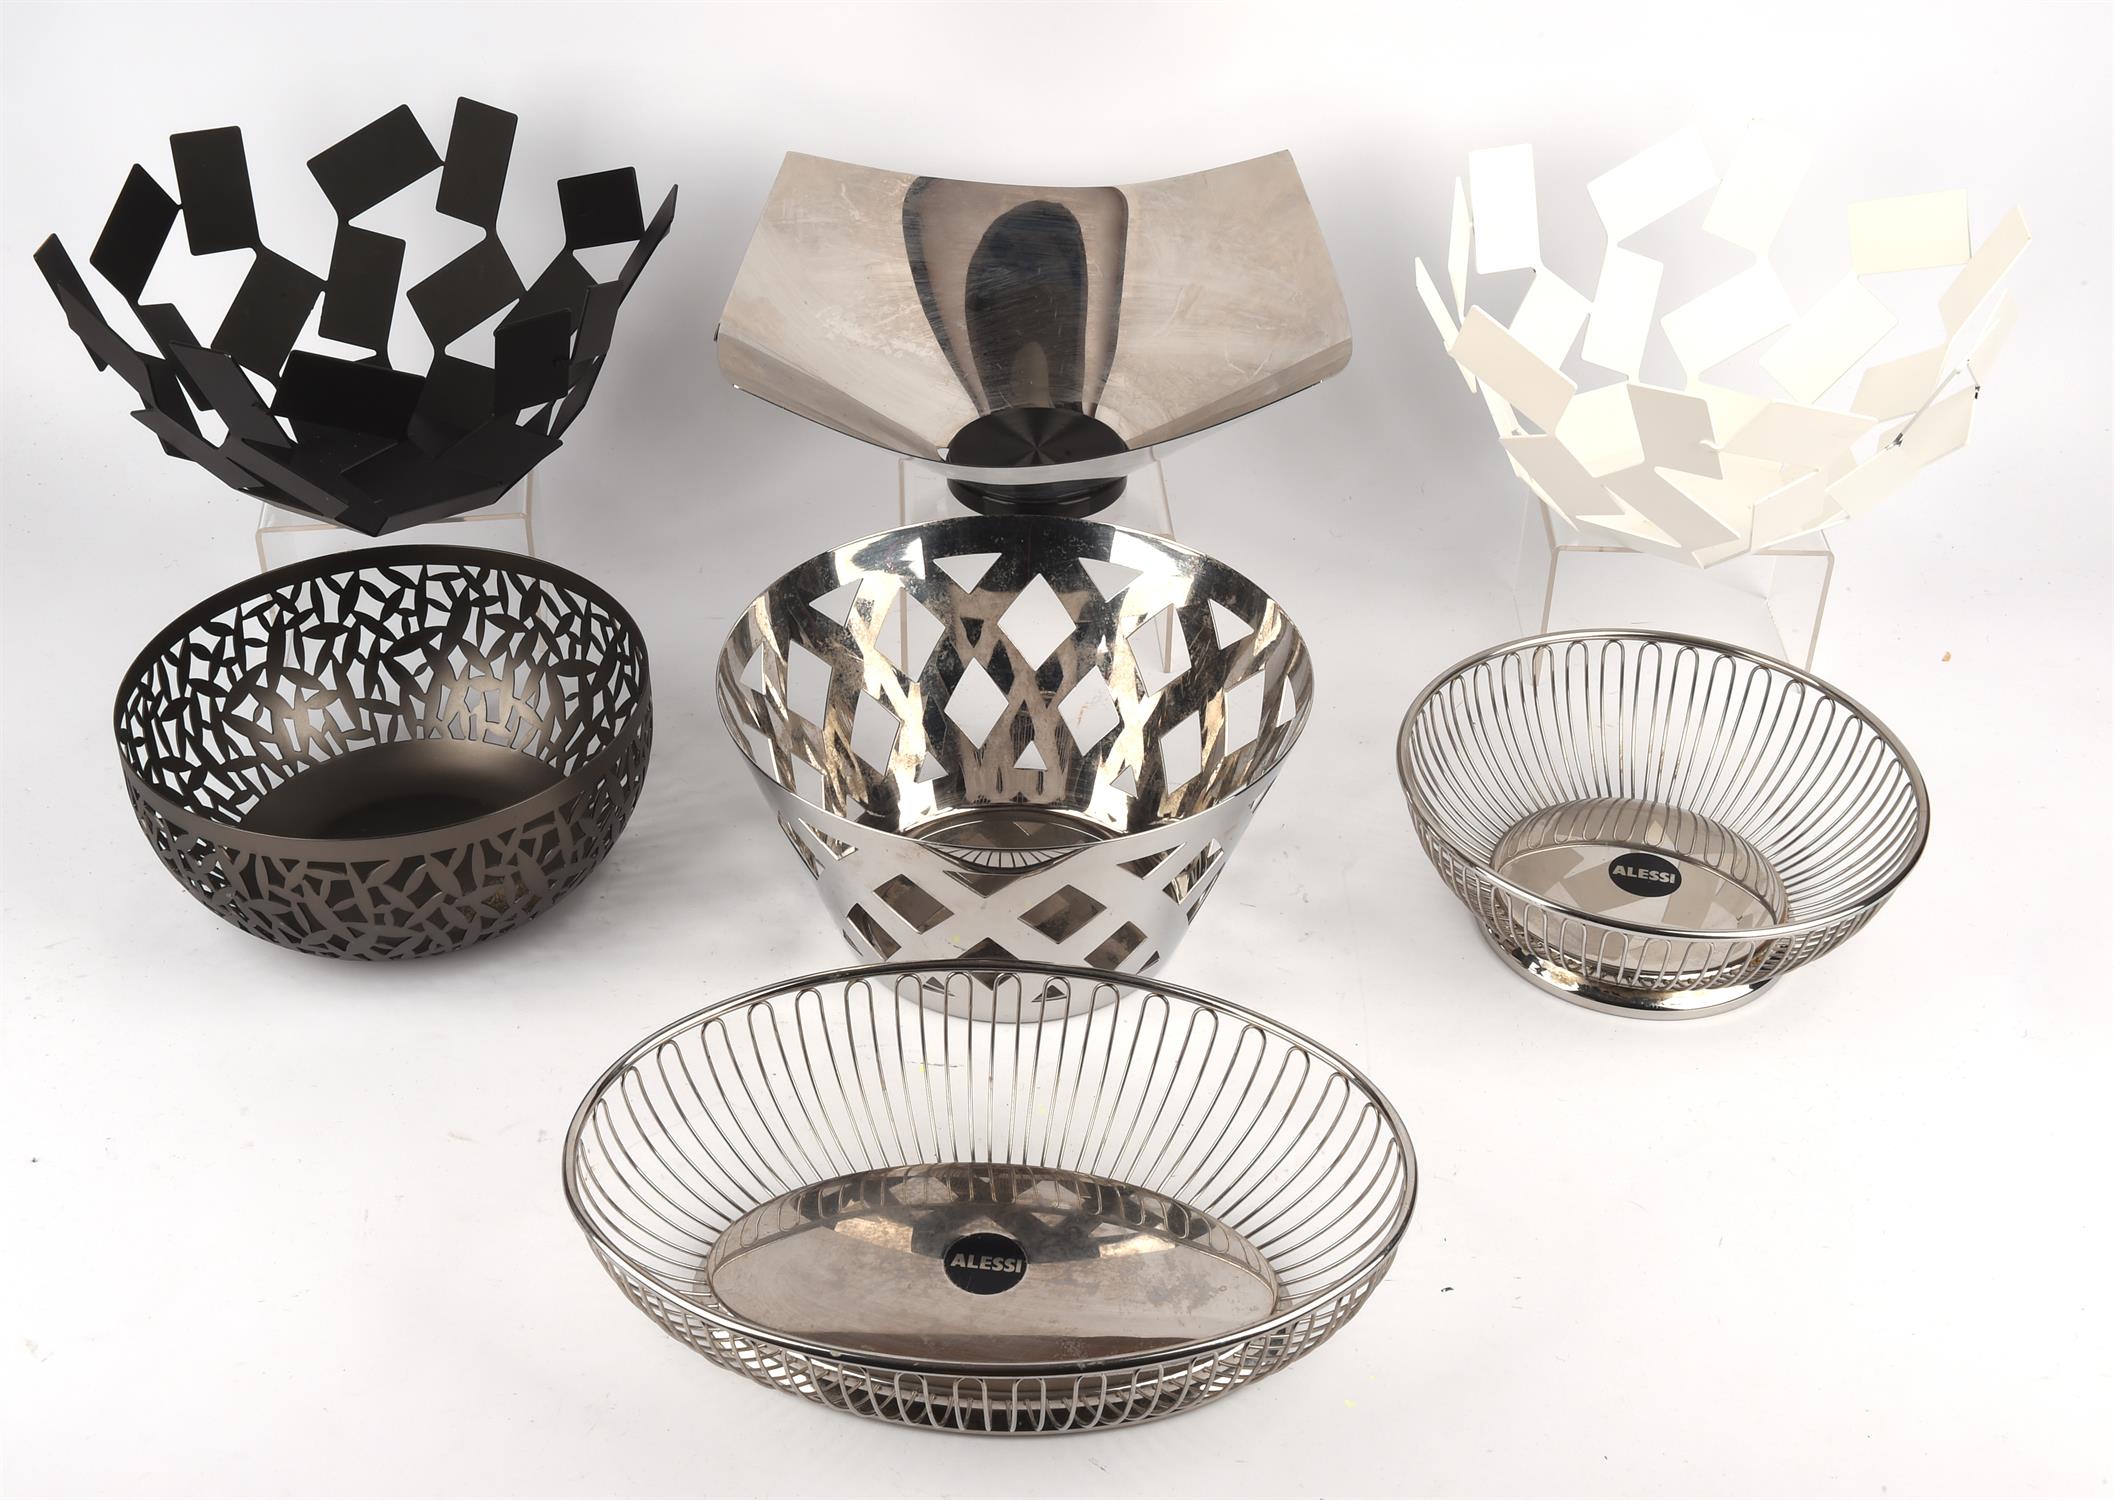 Mario Trimarchi for Alessi, a pair of black anodised metal bowls, together with a white bowl by the - Image 2 of 2